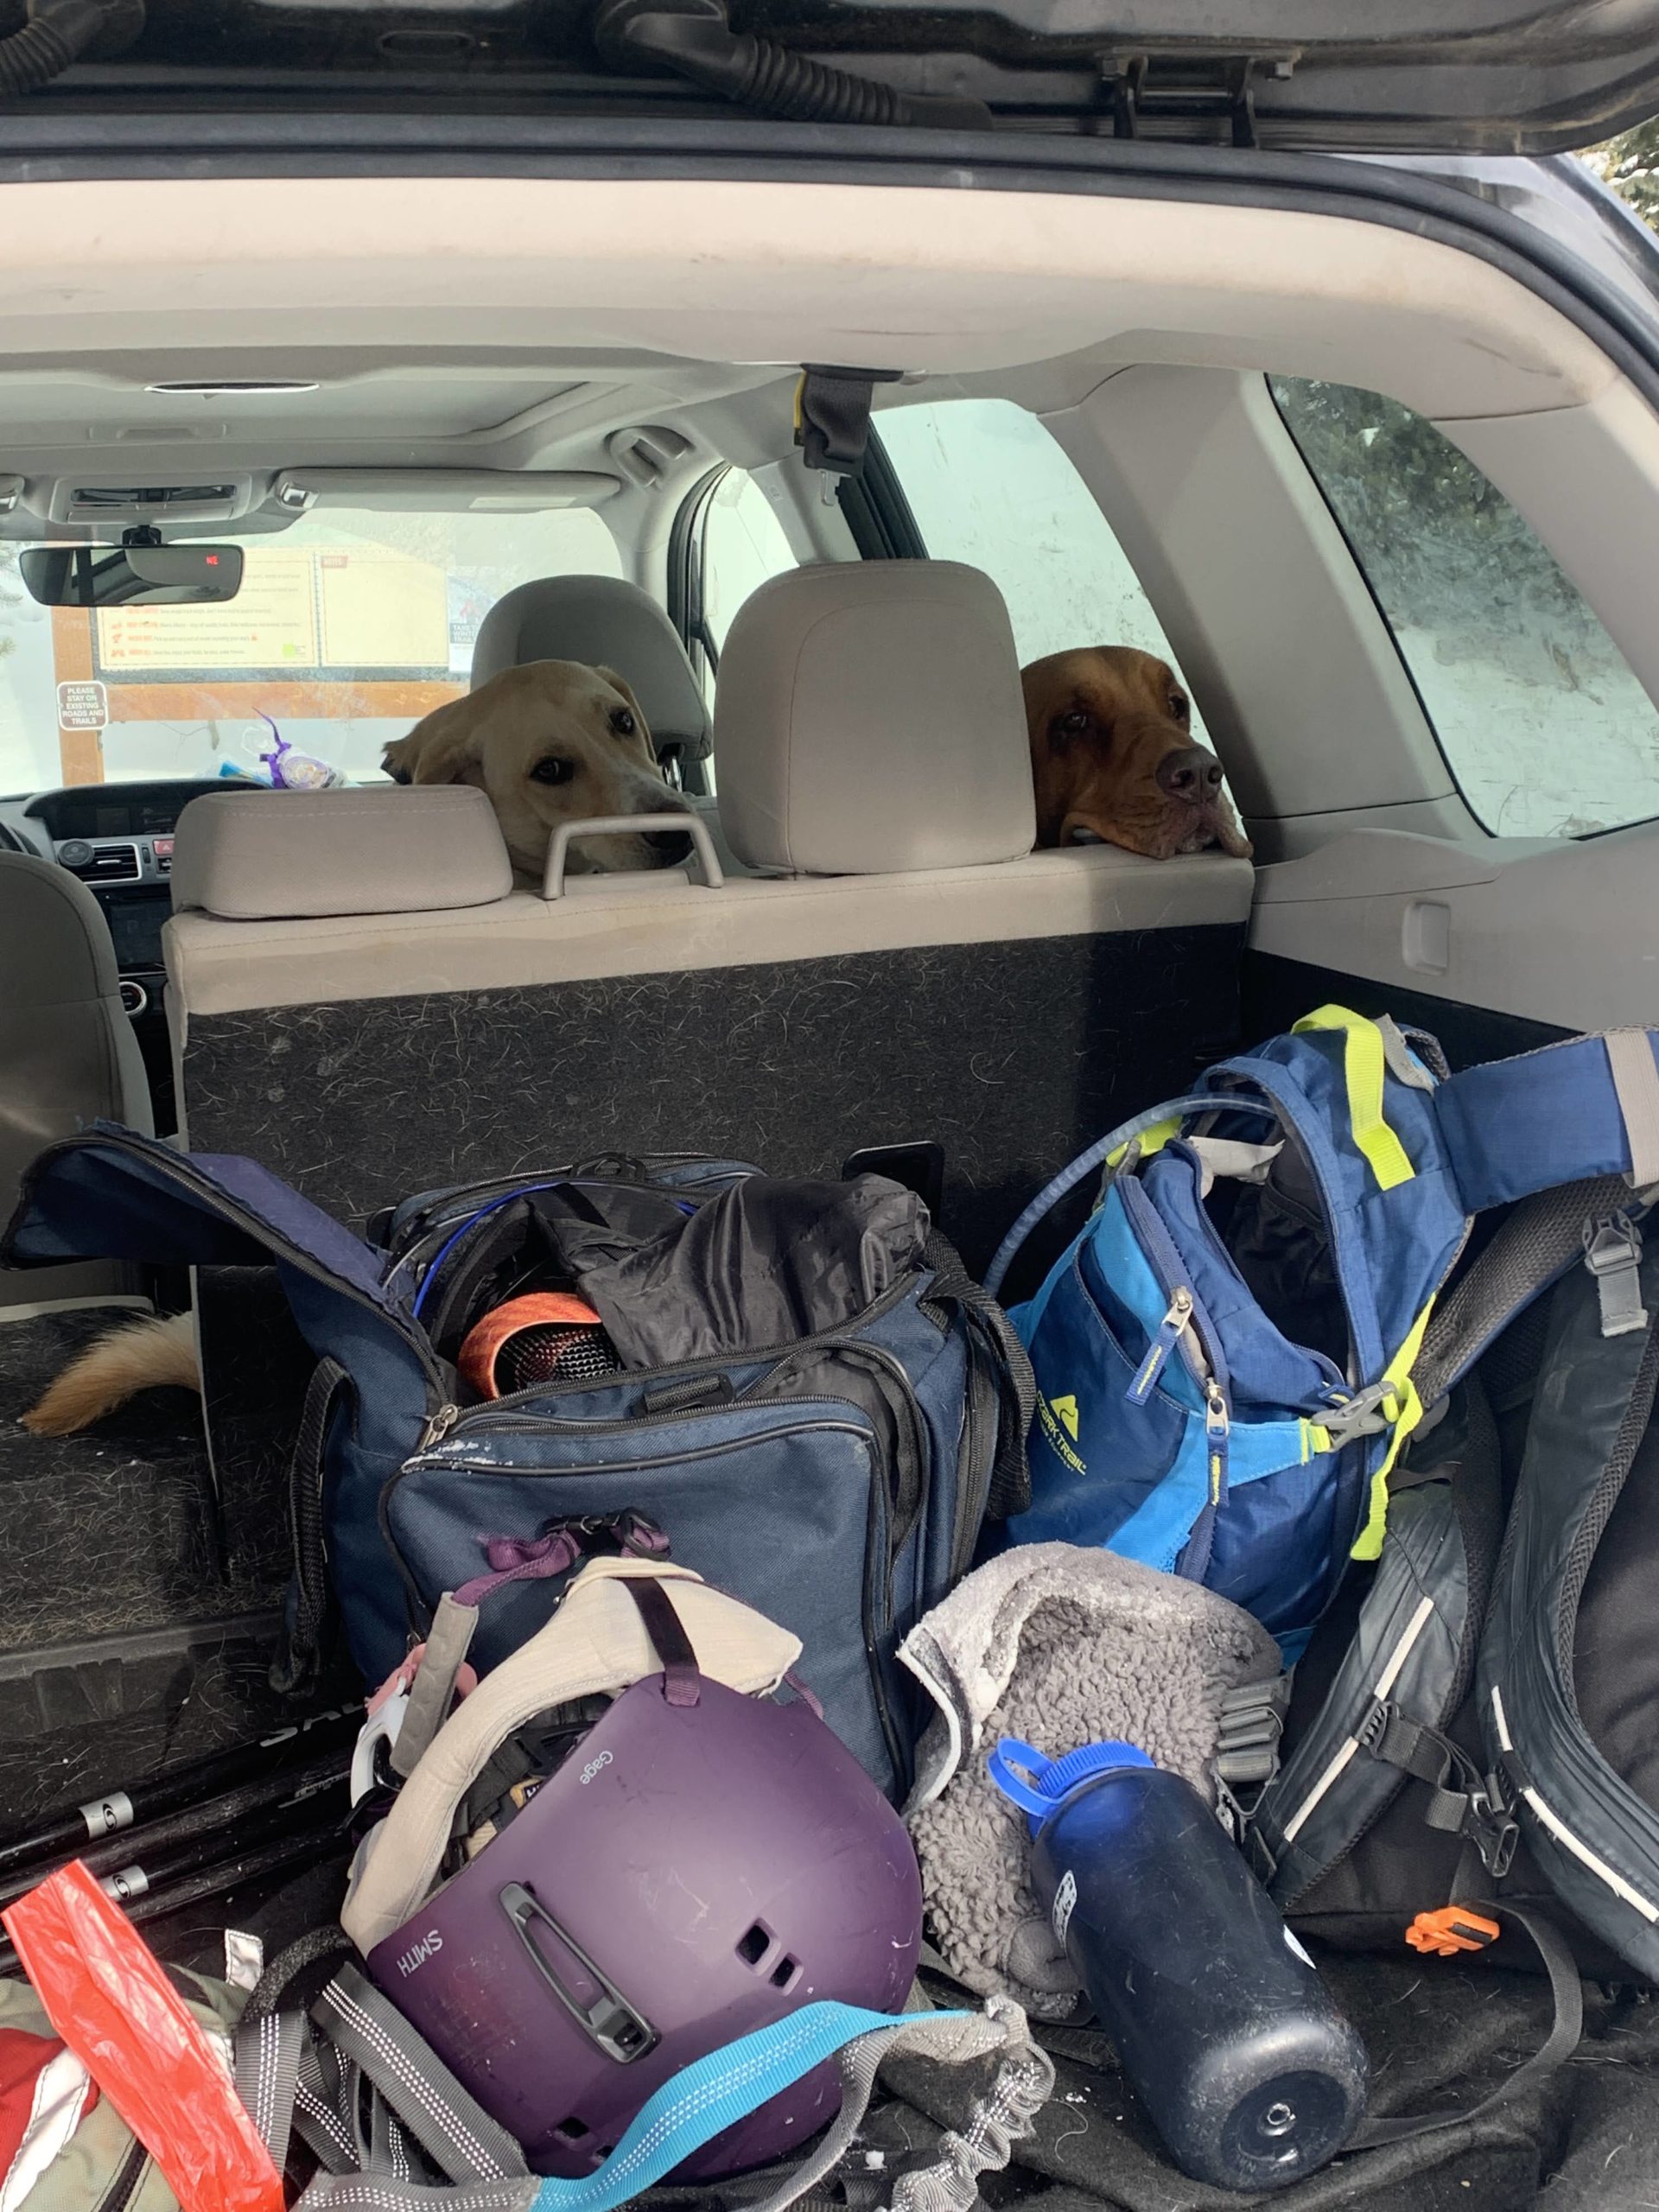 Dogs in car with hiking gear in trunk